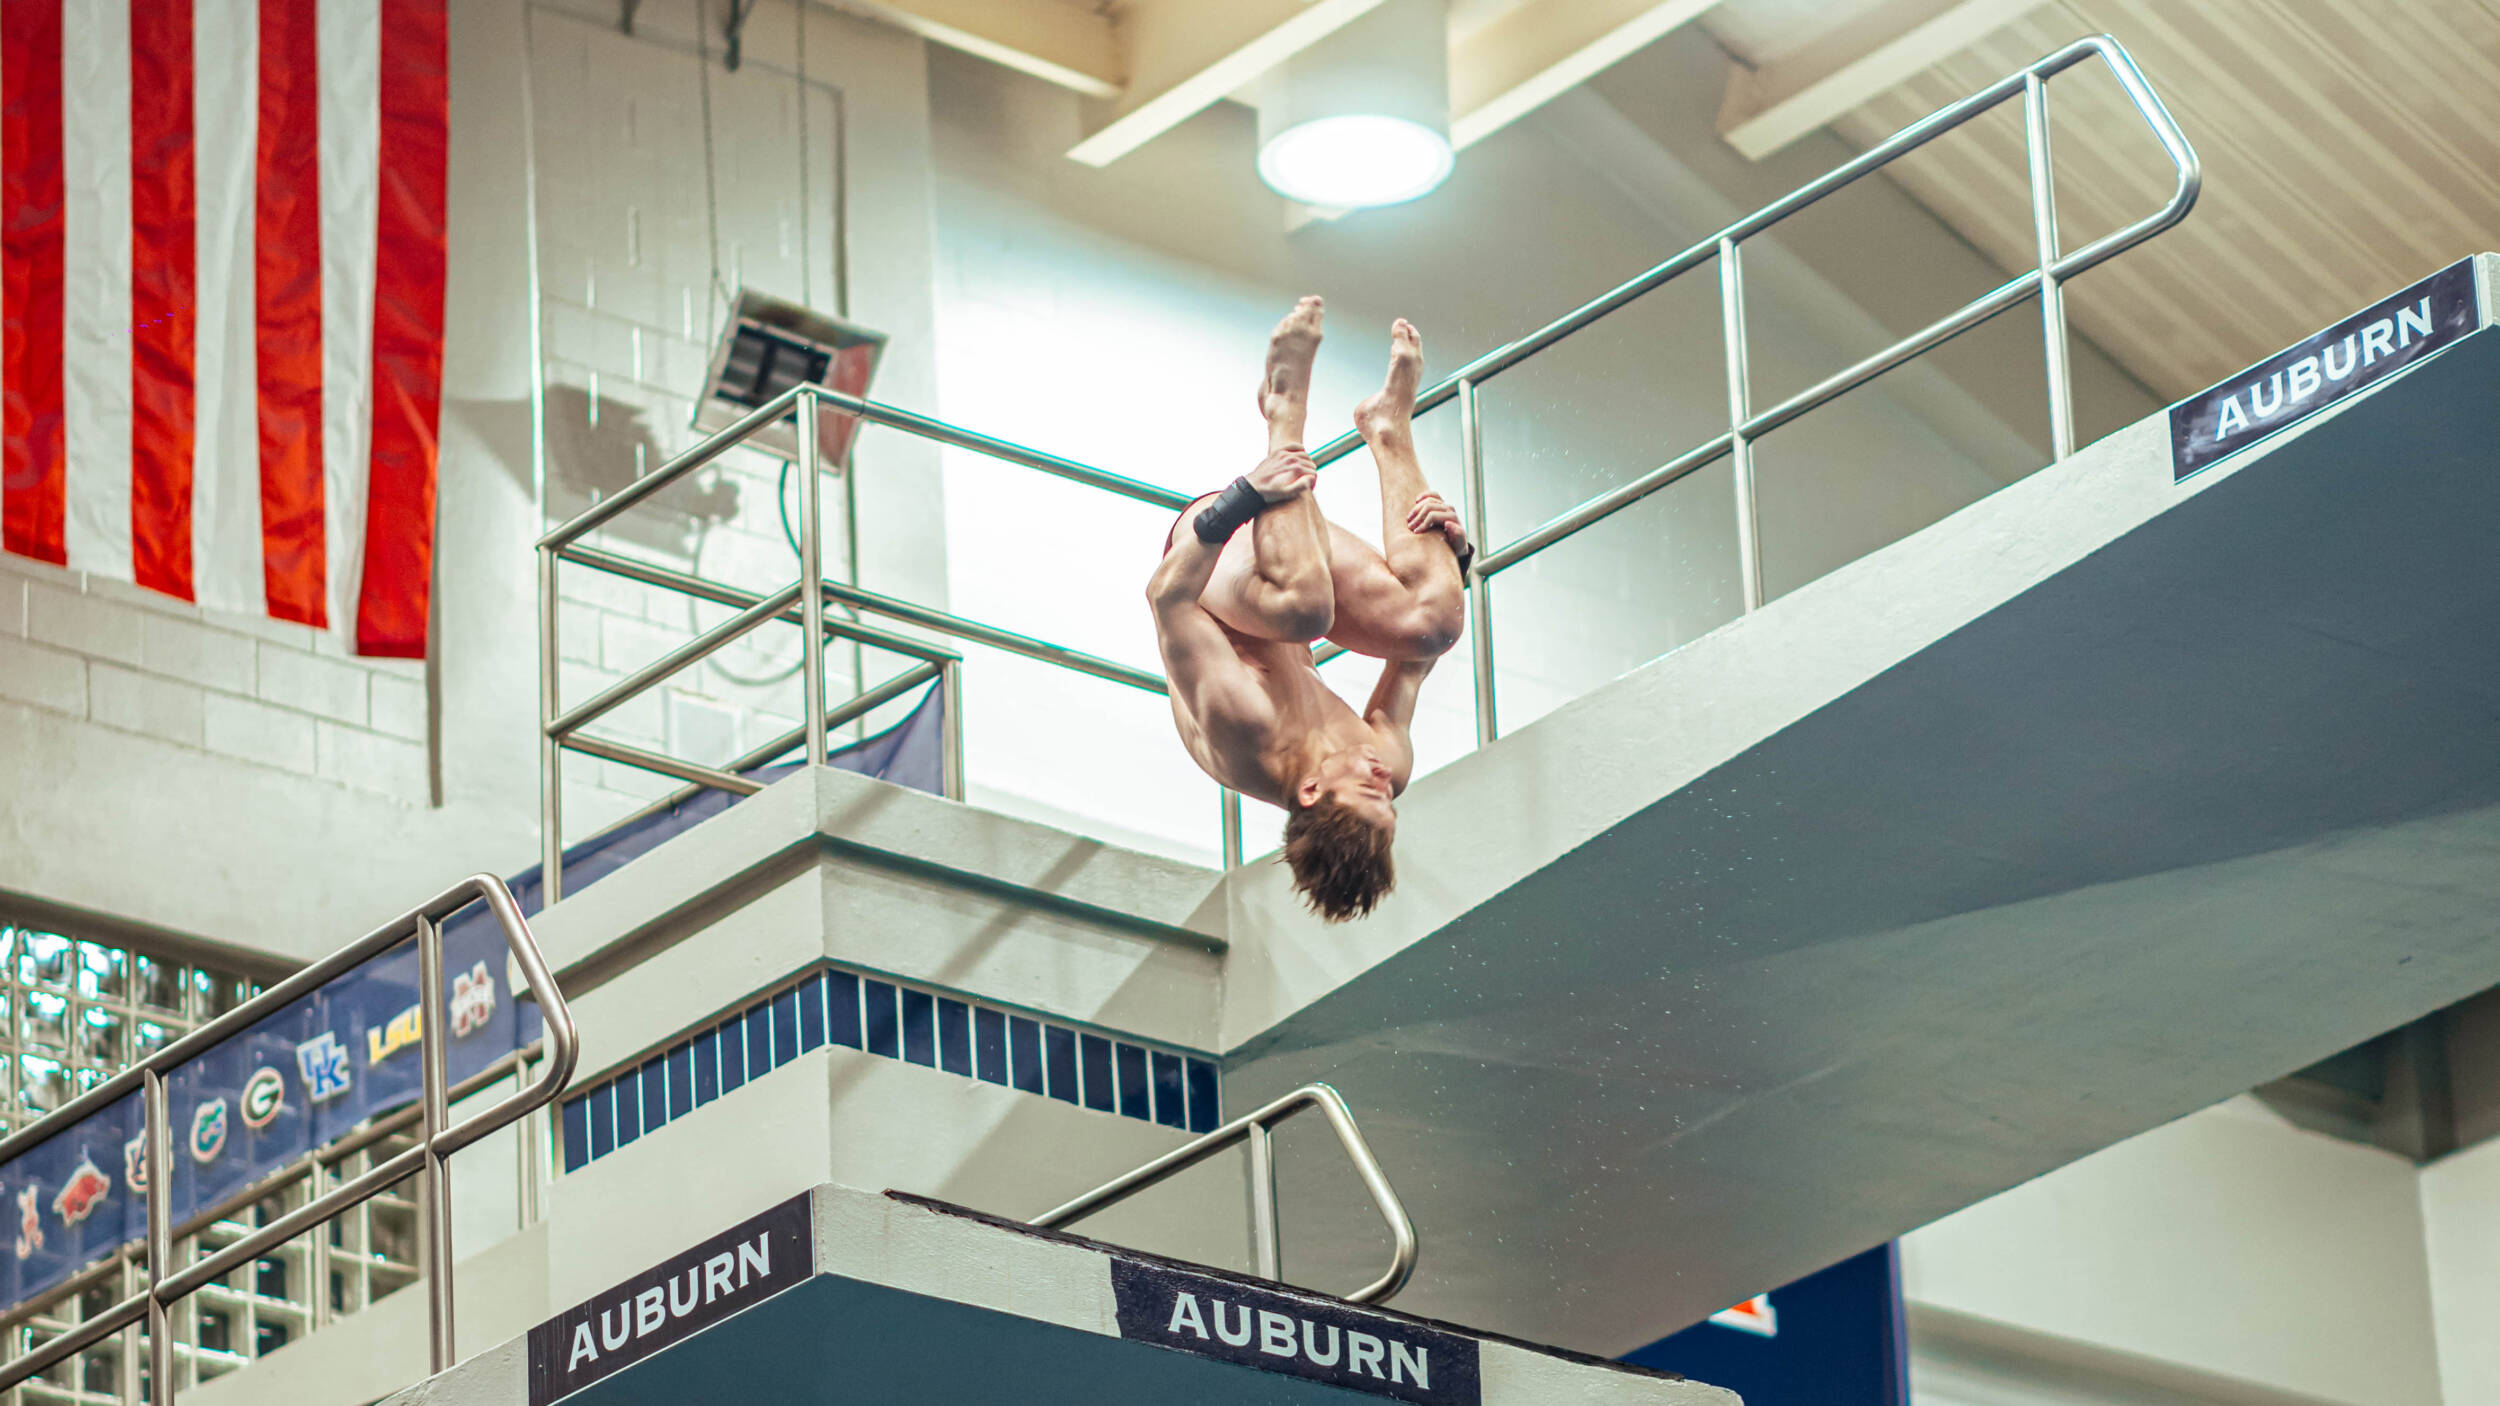 Divers Head to Athens in Search of NCAA Qualifications